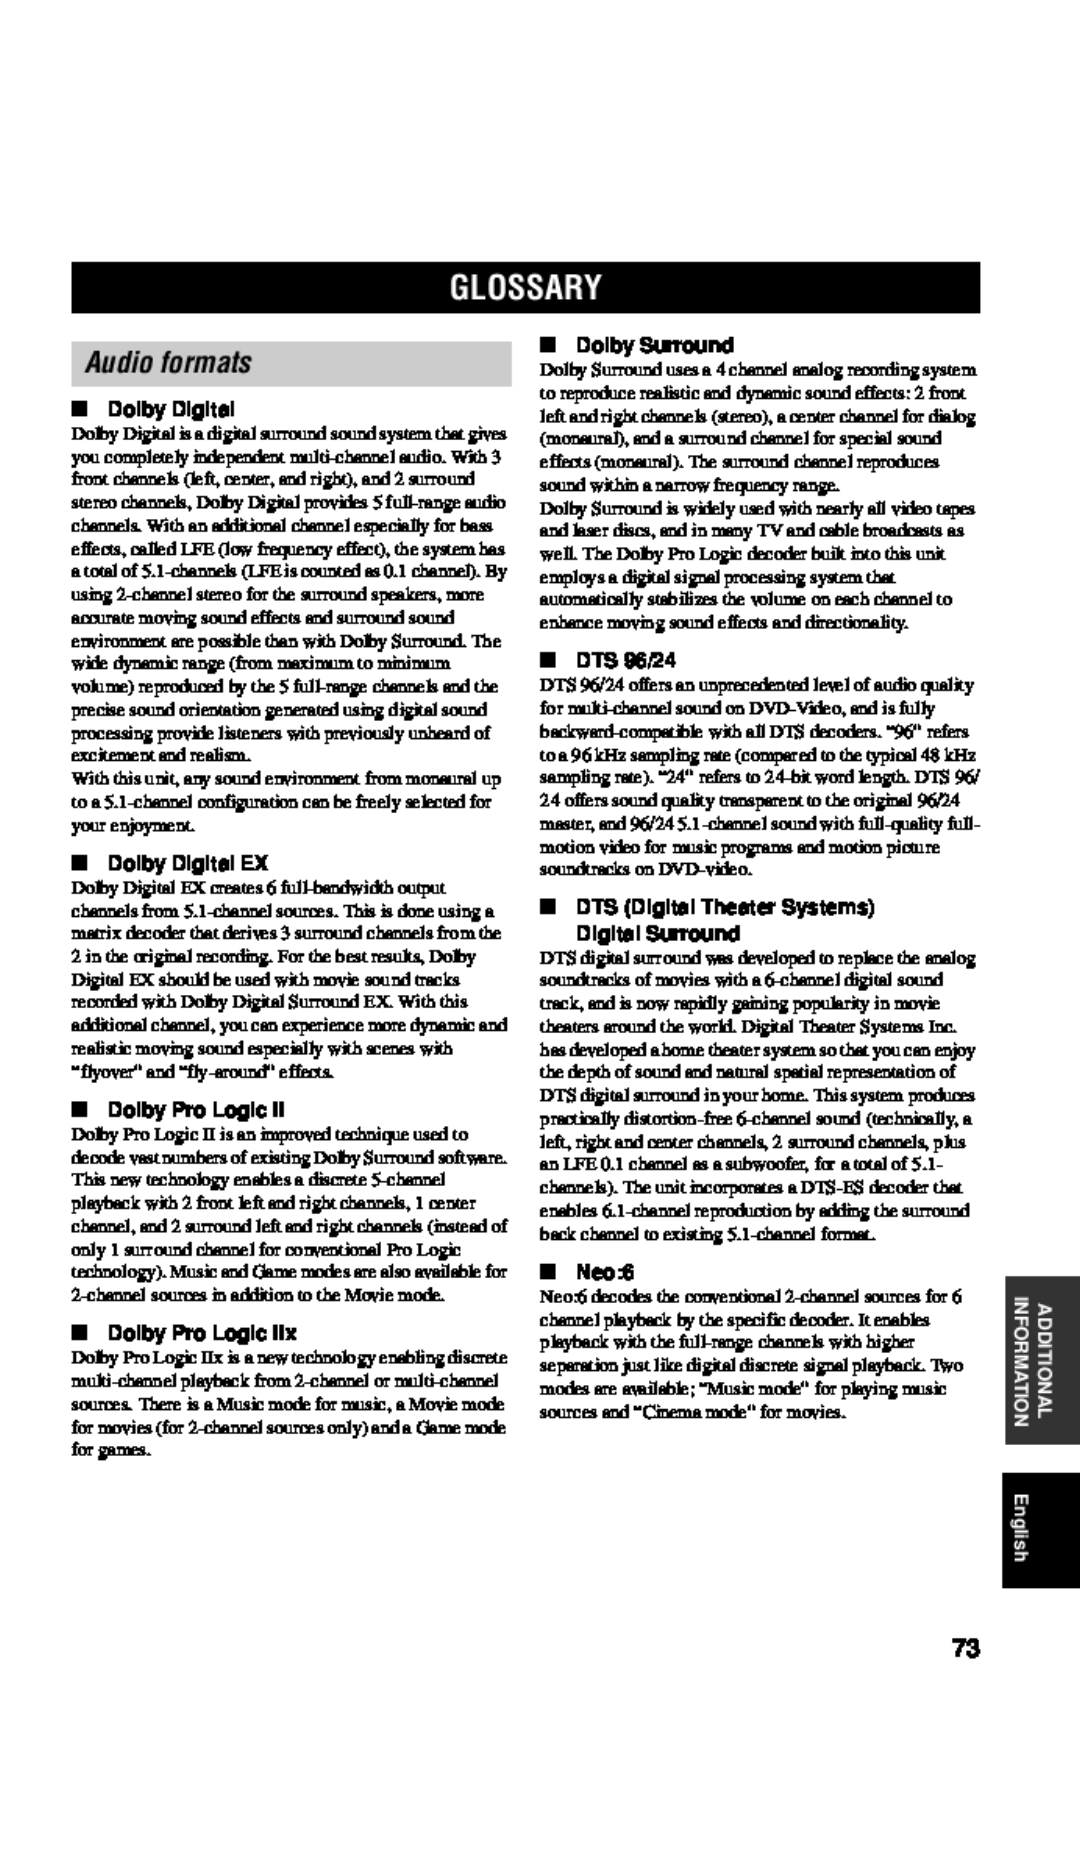 Yamaha RX-V557 owner manual Glossary, Audio formats, Dolby Digital EX, Dolby Pro Logic, Dolby Surround, DTS 96/24, Neo 